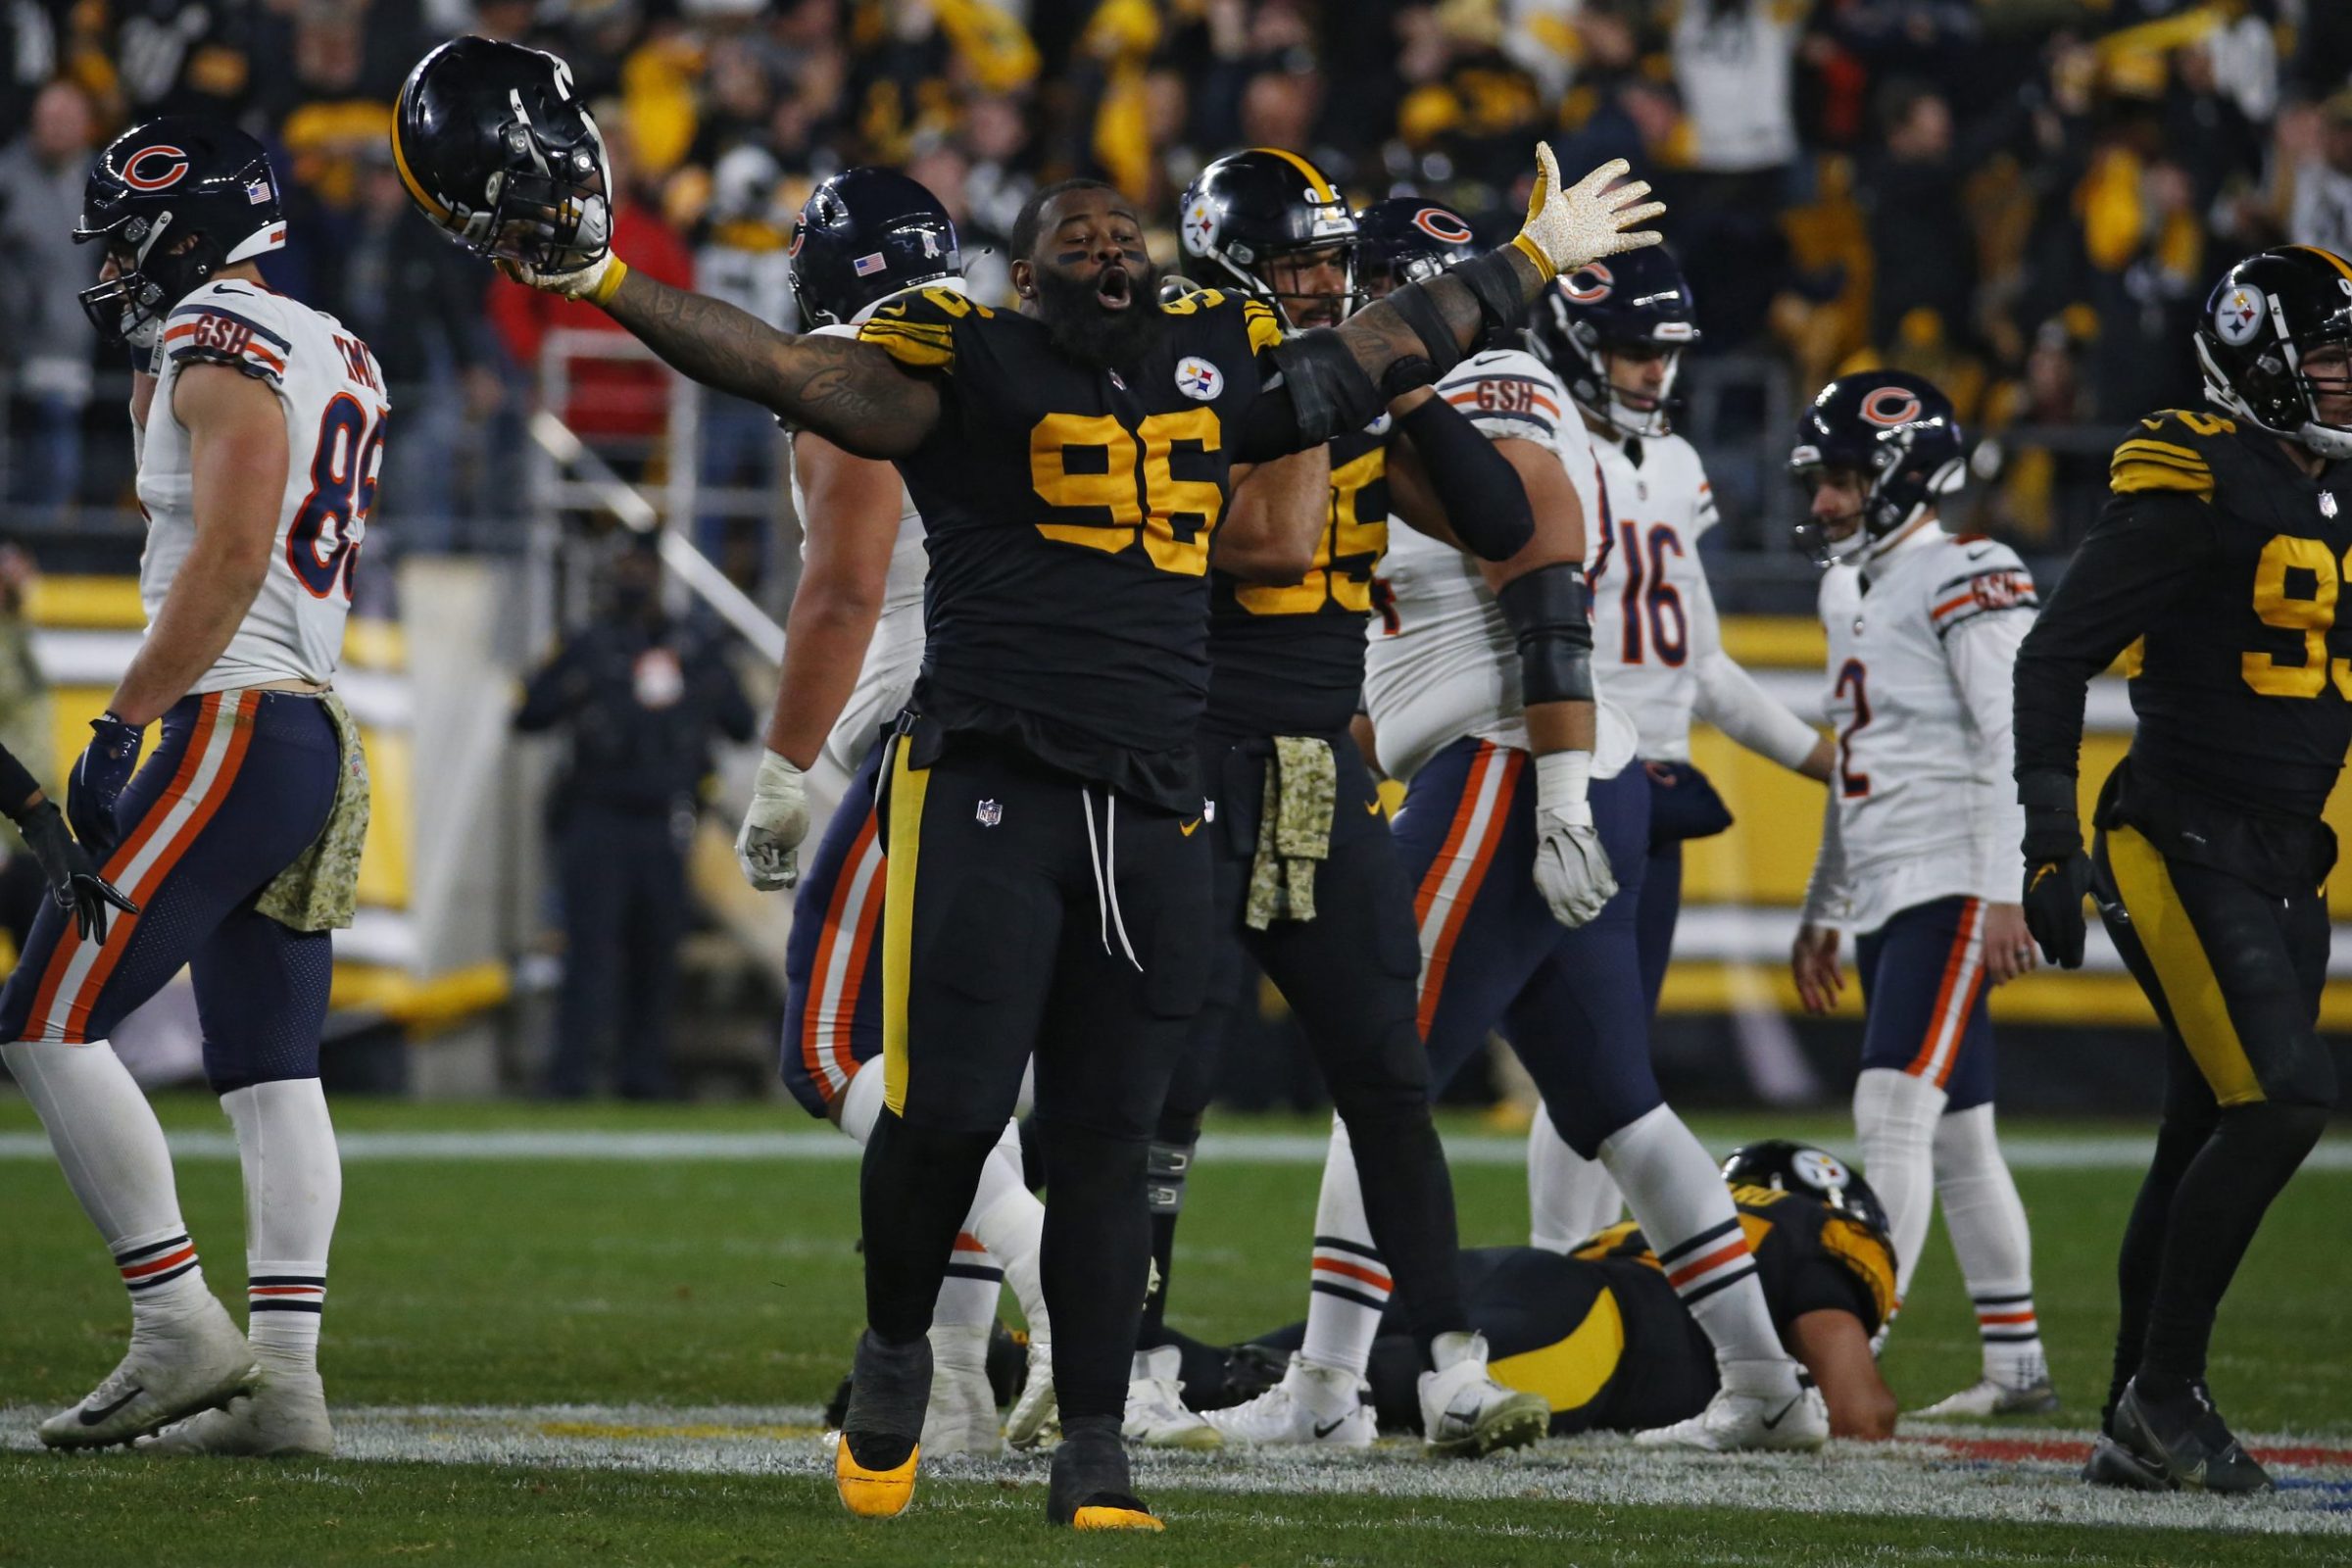 Isaiah Buggs of the Steelers celebrates the win